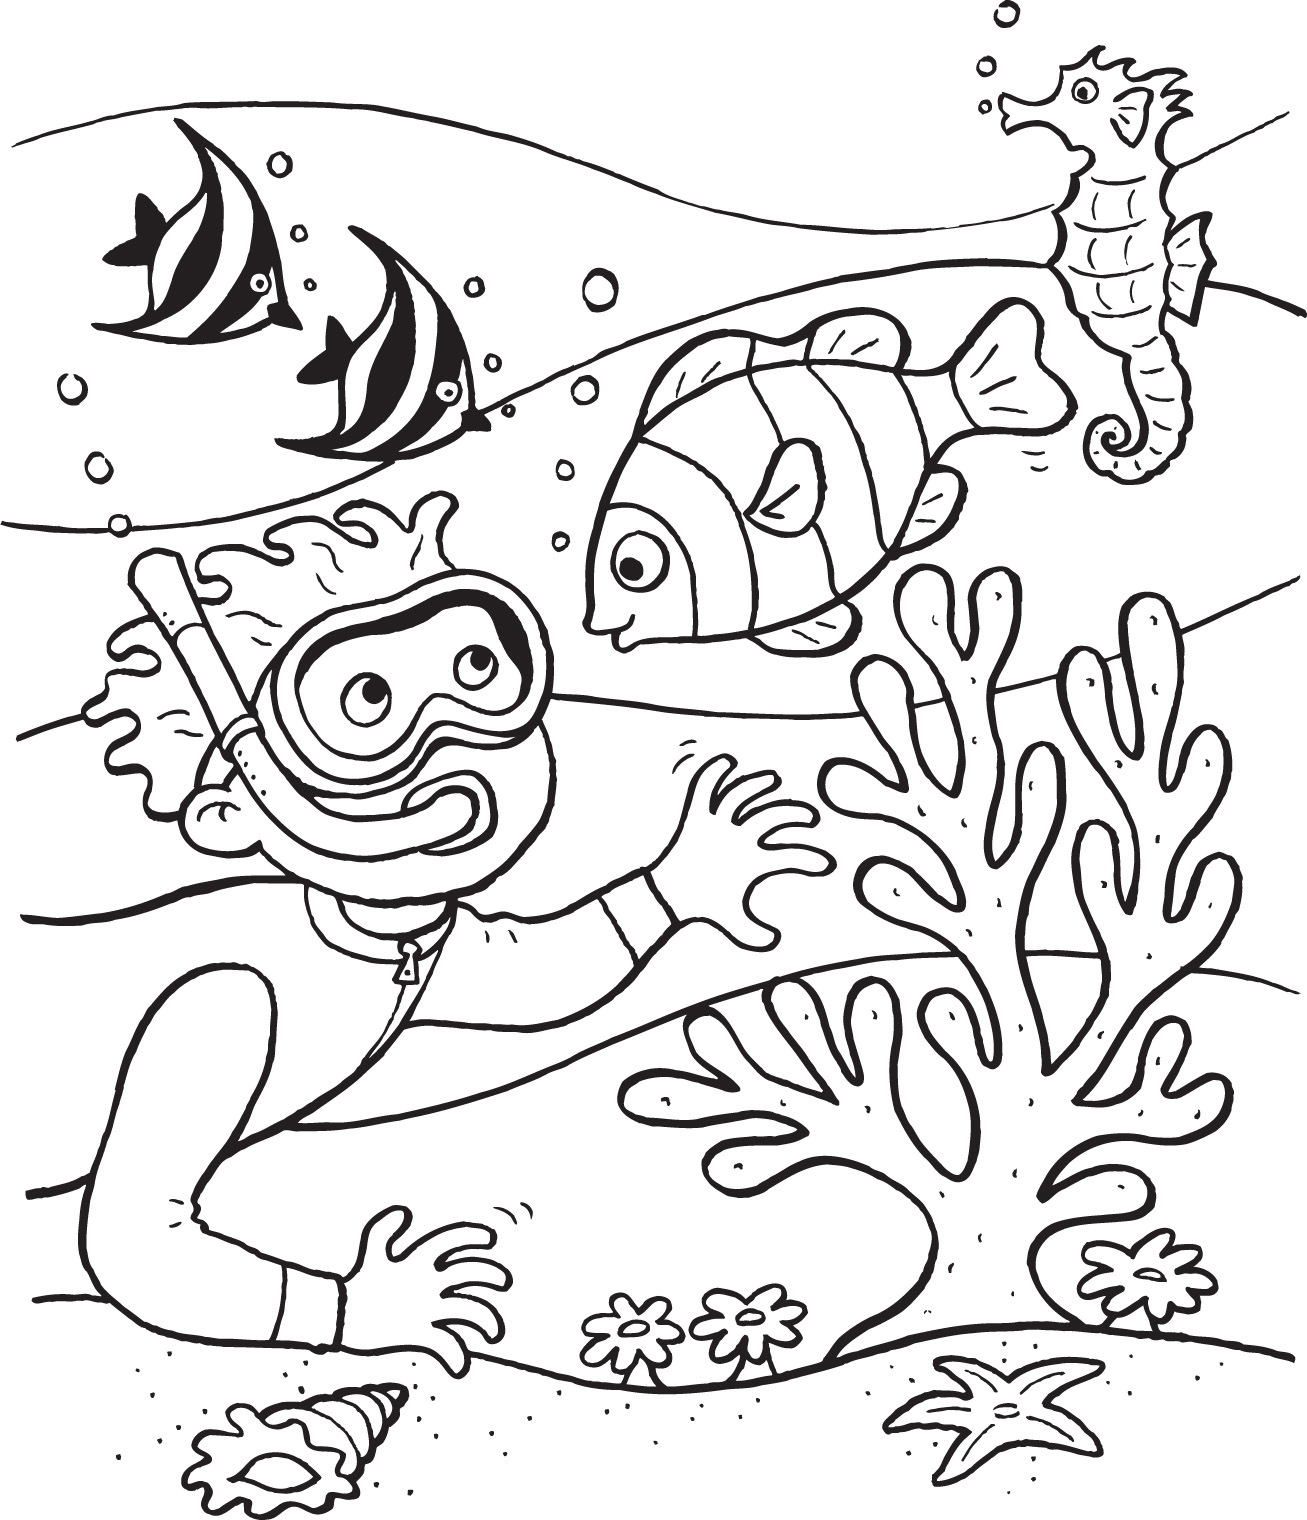 Sea Plants Coloring Pages at GetColorings.com | Free ...